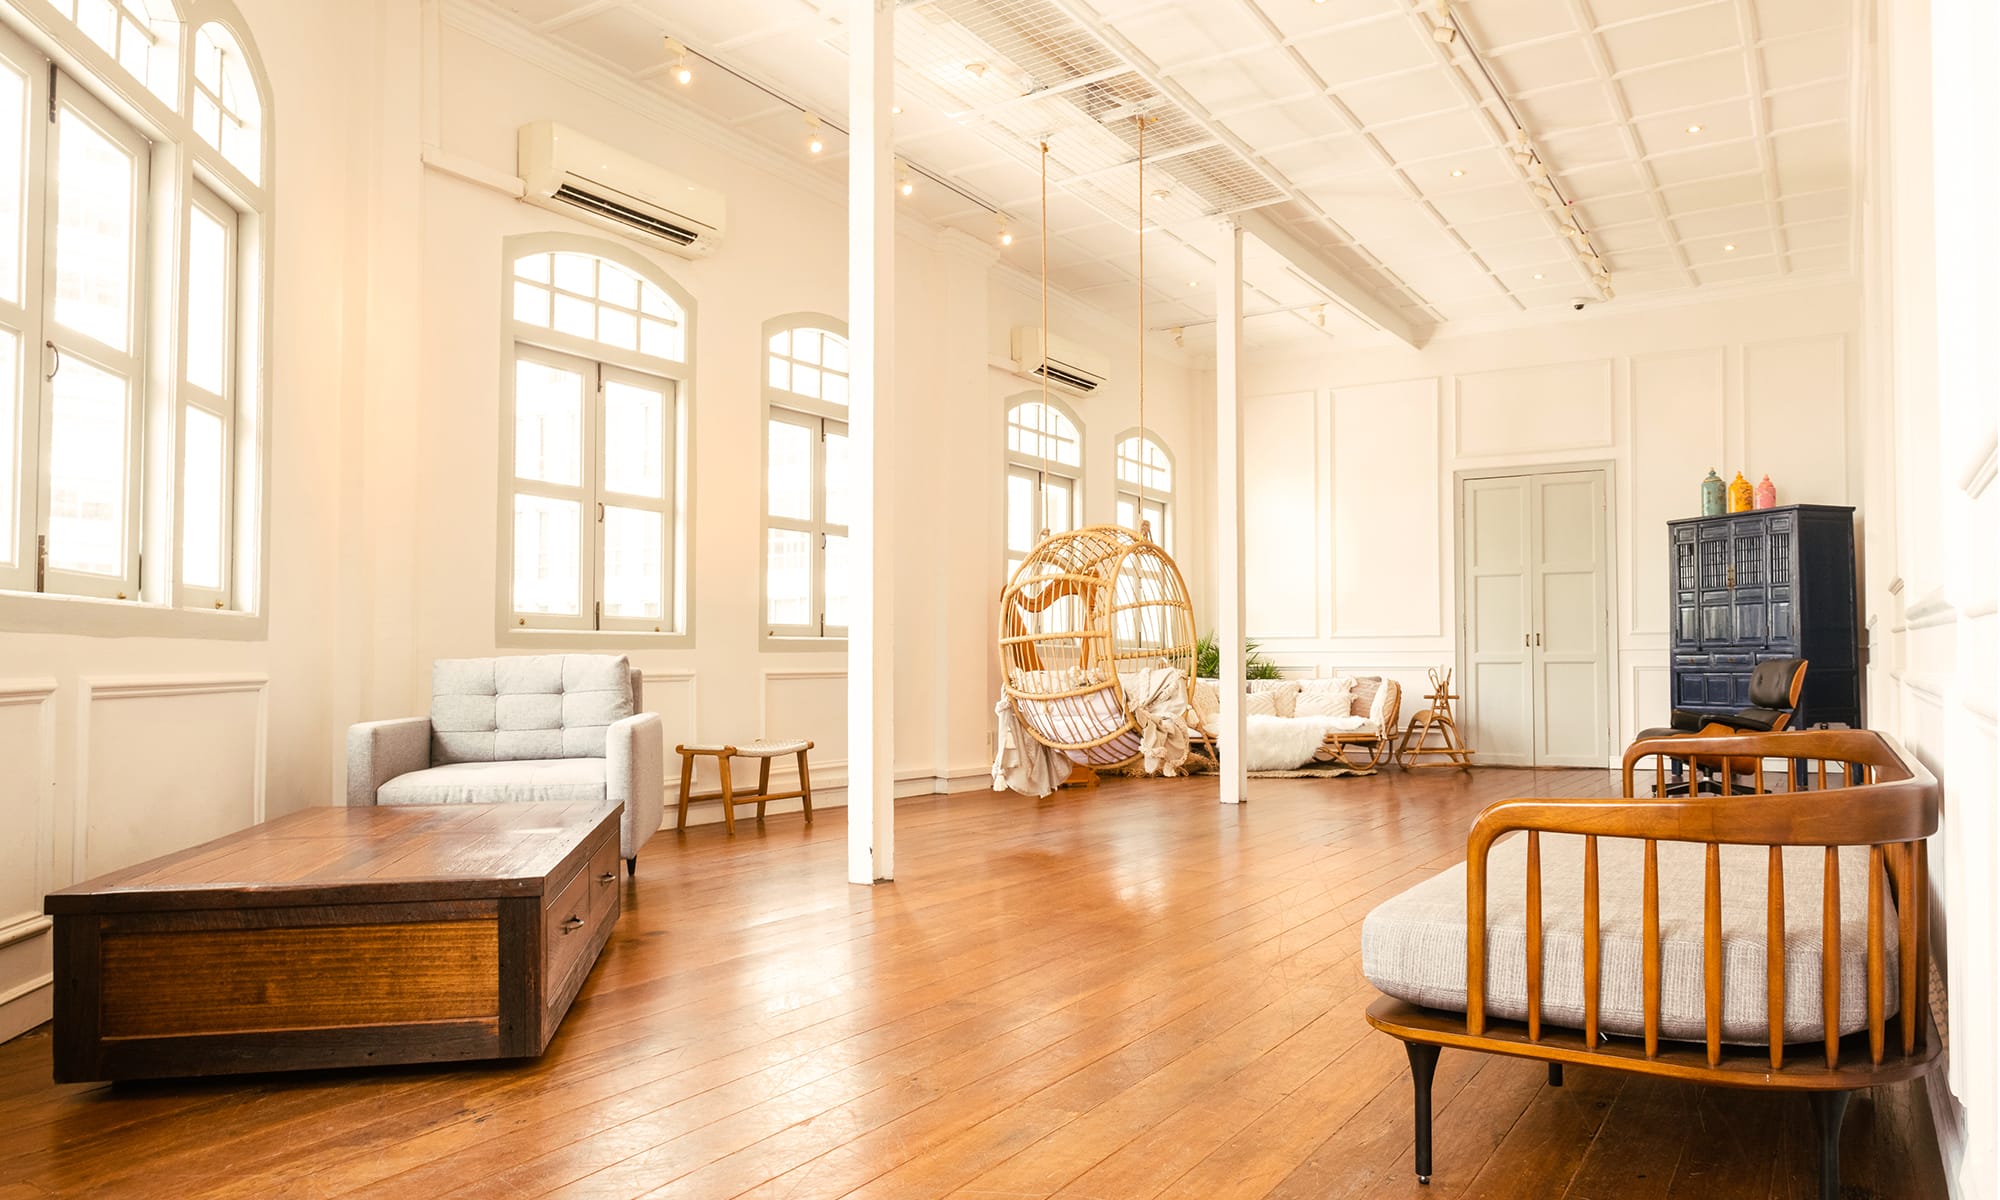 Panoramic photo of a photography studio space with white walls with wainscoting, and tall windows with natural sunlight with rustic wooden furniture in River Valley, Singapore Credit: White Room Studio